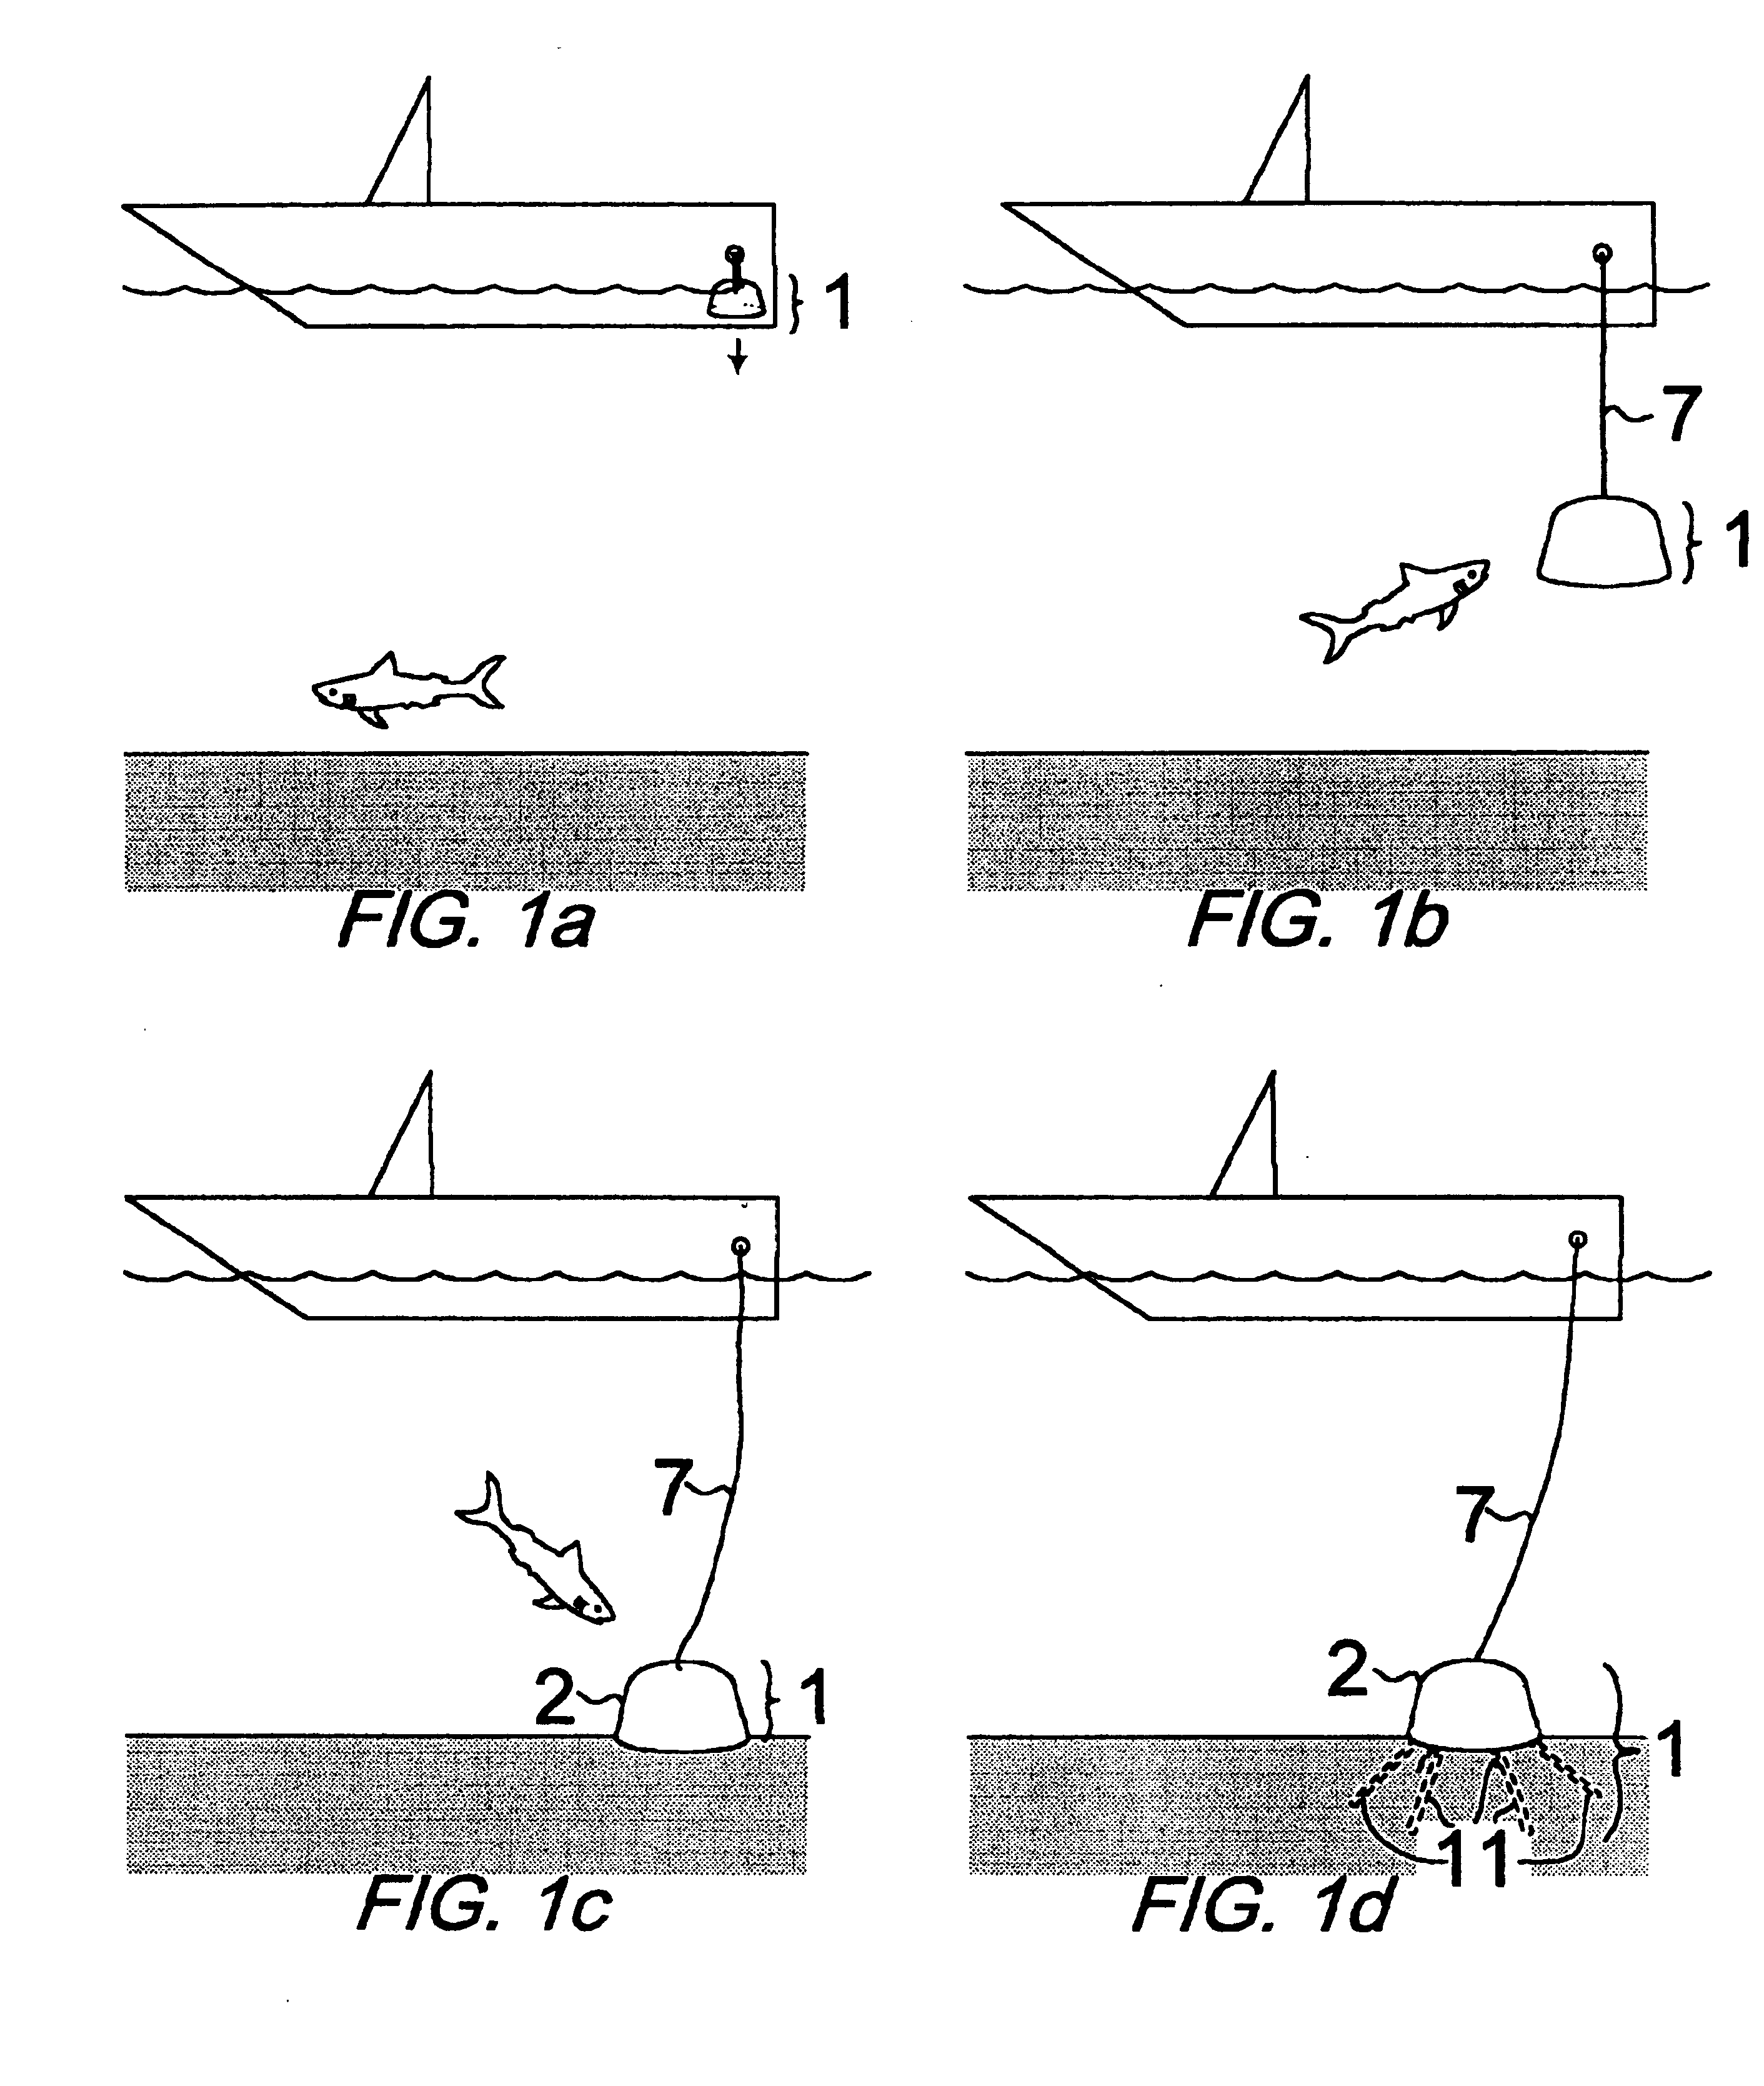 Anchoring systems and methods for anchoring an object